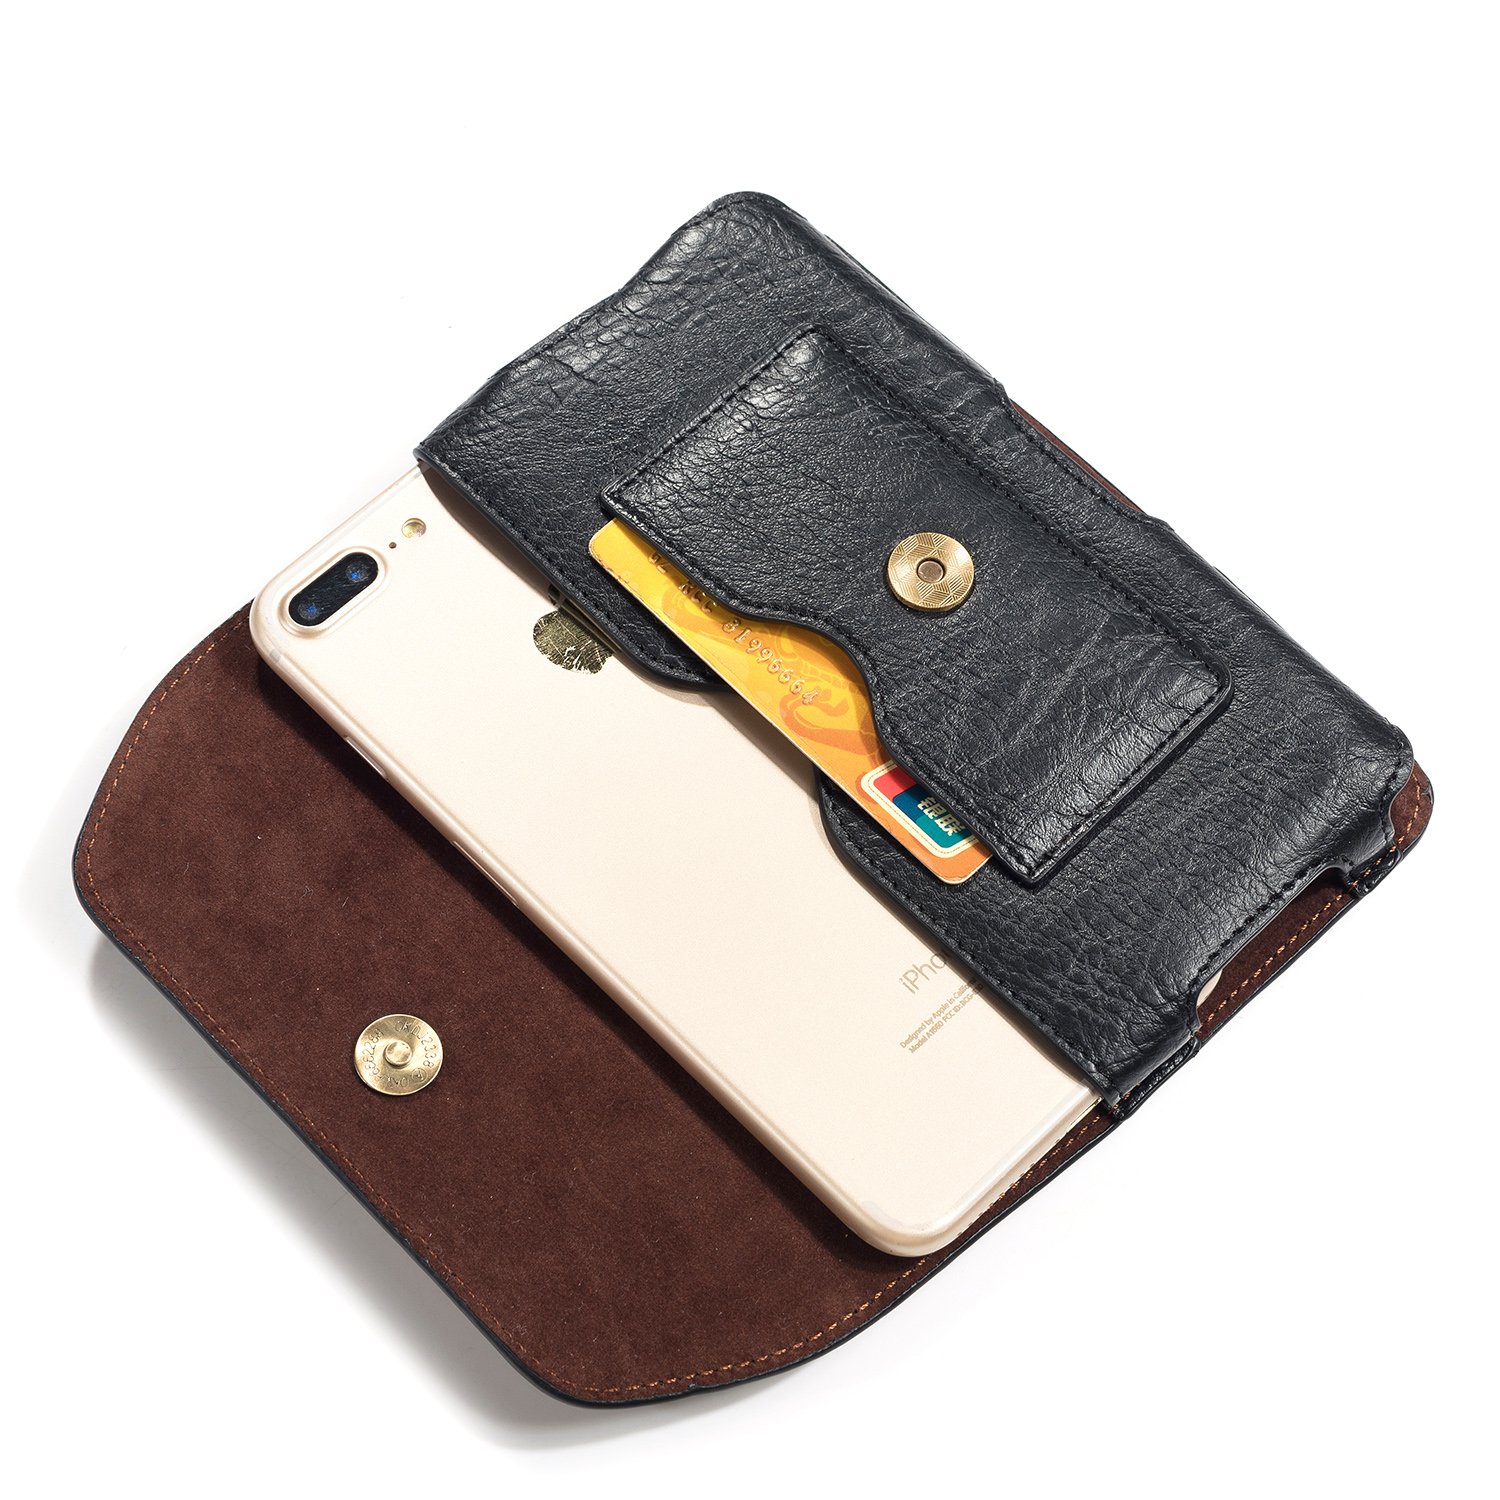 Bakeey-Casual-Vintage-Bussiness-64-inch-Multifunctional-with-Card-Slot-PU-Leather-Mobile-Phone-Money-1692762-10